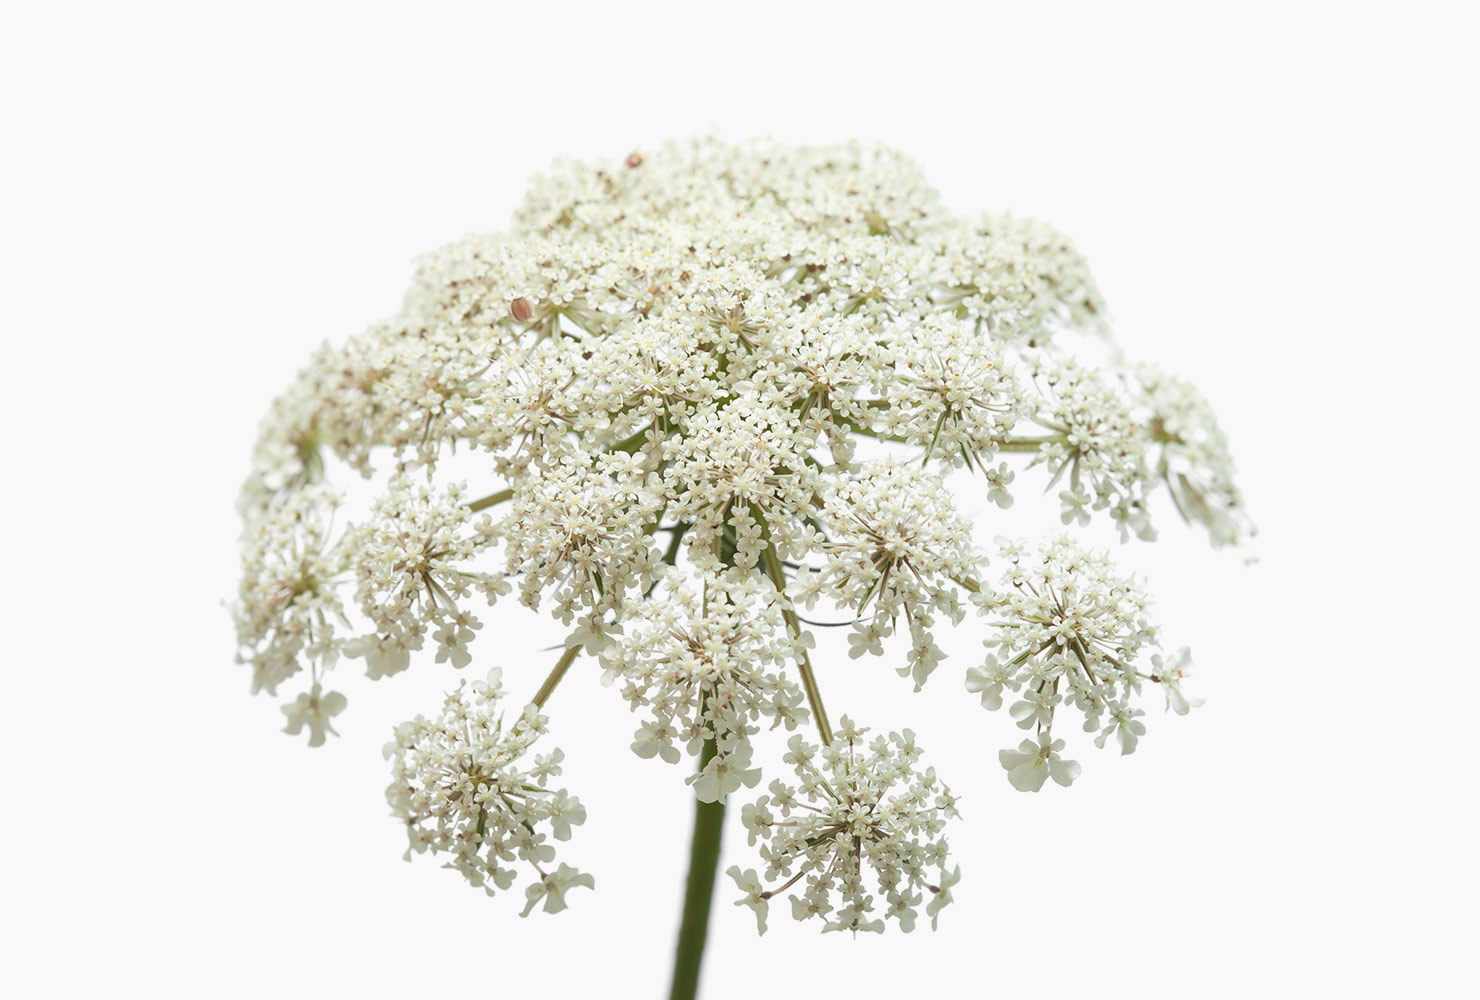 A queen anne's lace white flower. 